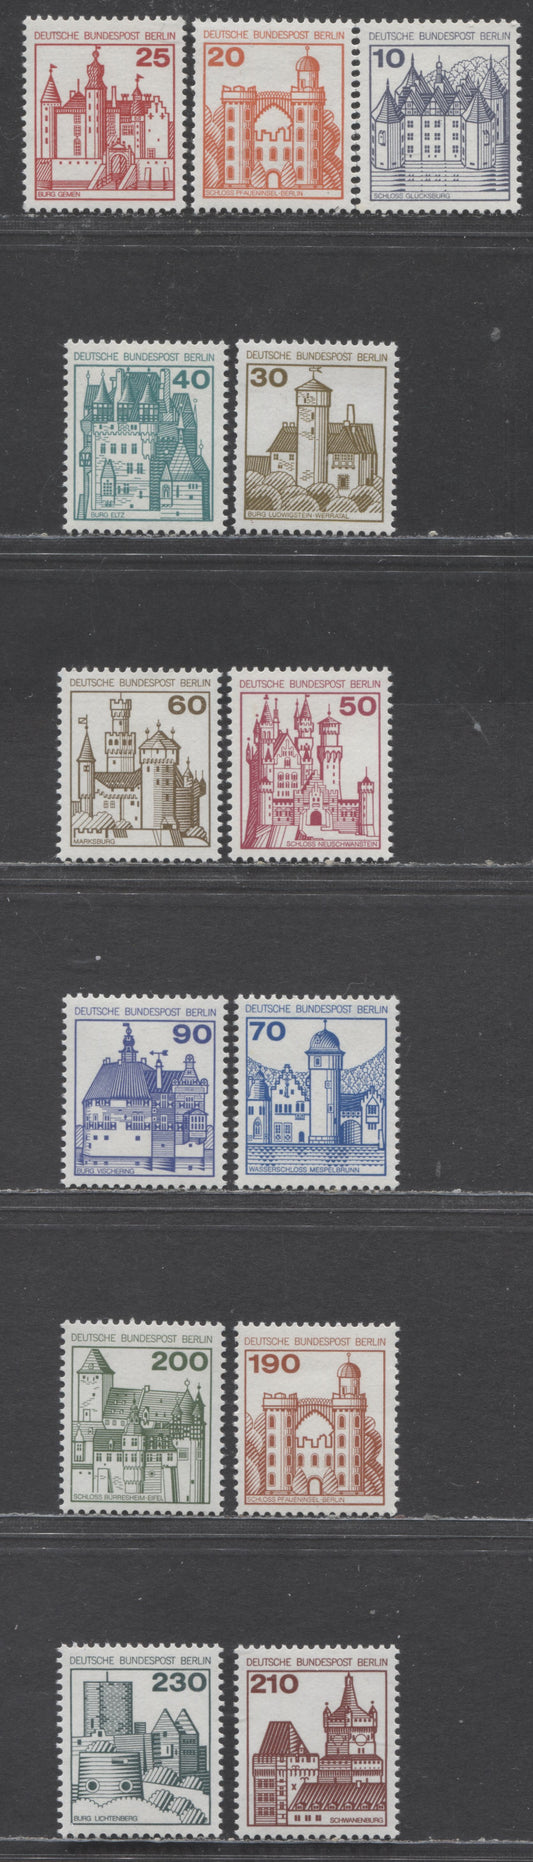 Berlin-Germany SC#9N391-9N403(Mi#532AI-540AI,587-590) 1977-1979 Castles Issue, 13 VFNH Singles, Click on Listing to See ALL Pictures, Estimated Value $12 USD